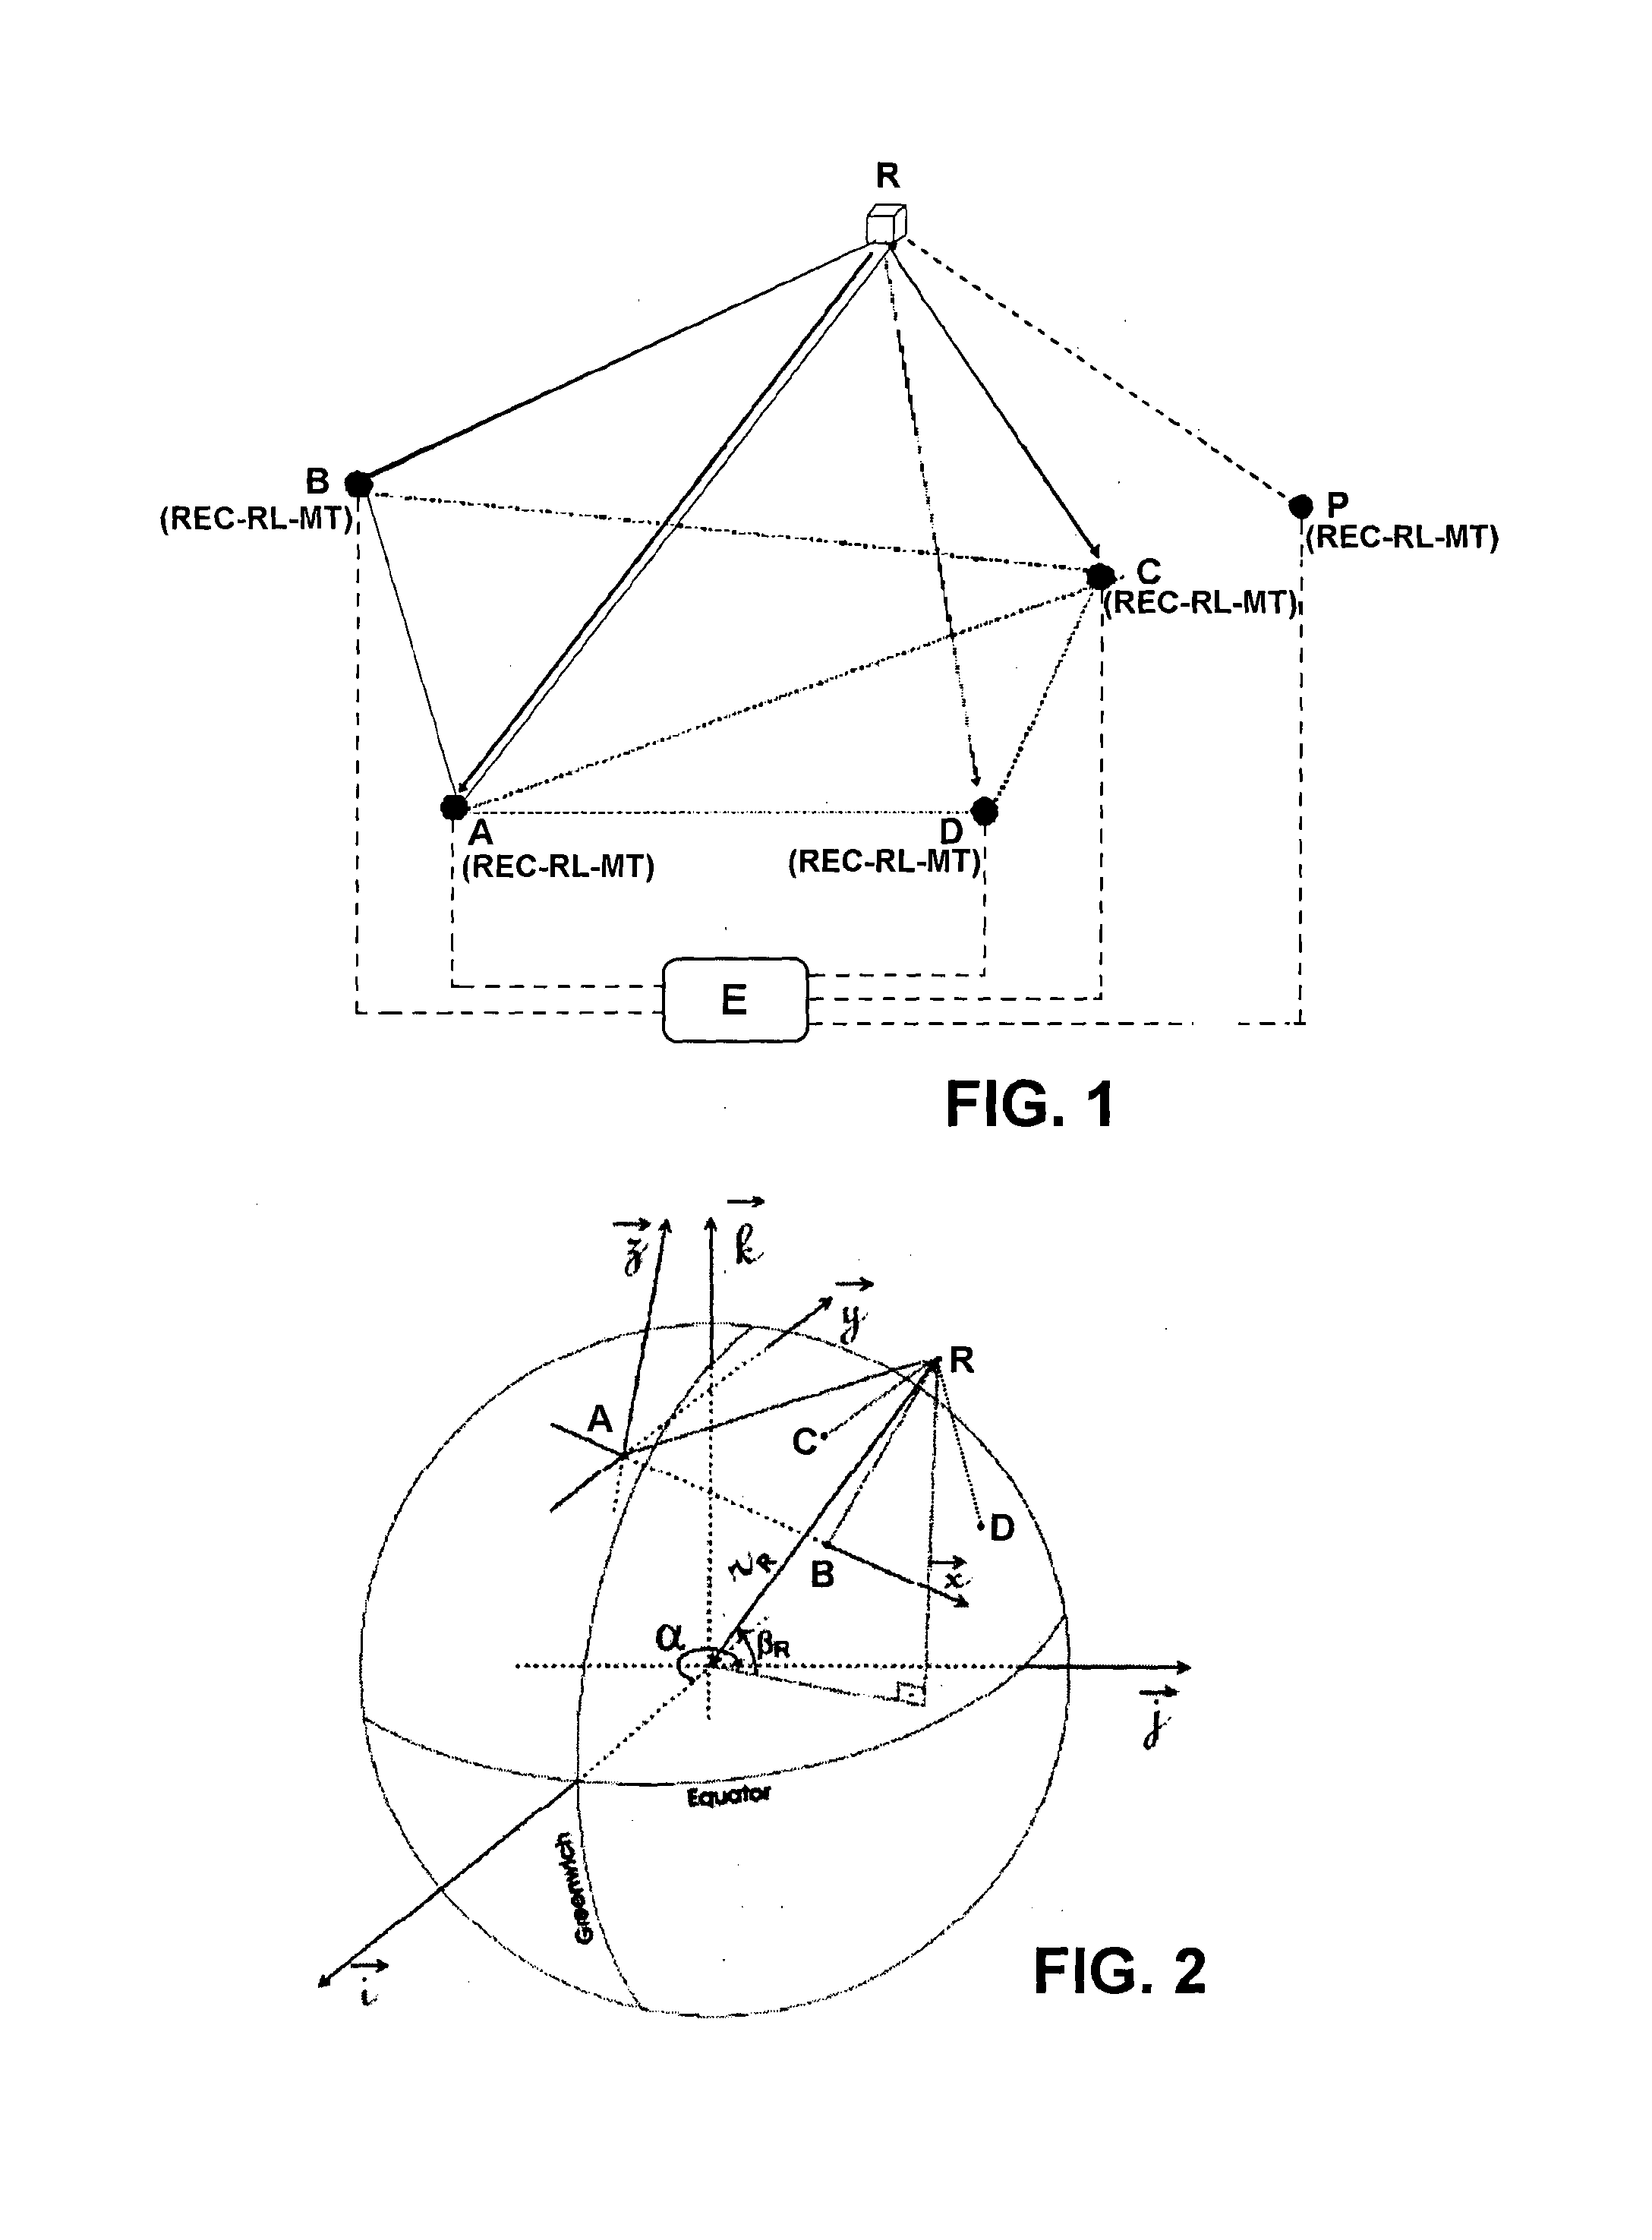 Process and system to determine temporal changes in retransmission and propagation of signals used to measure distances, syncronize actuators and georeference applications